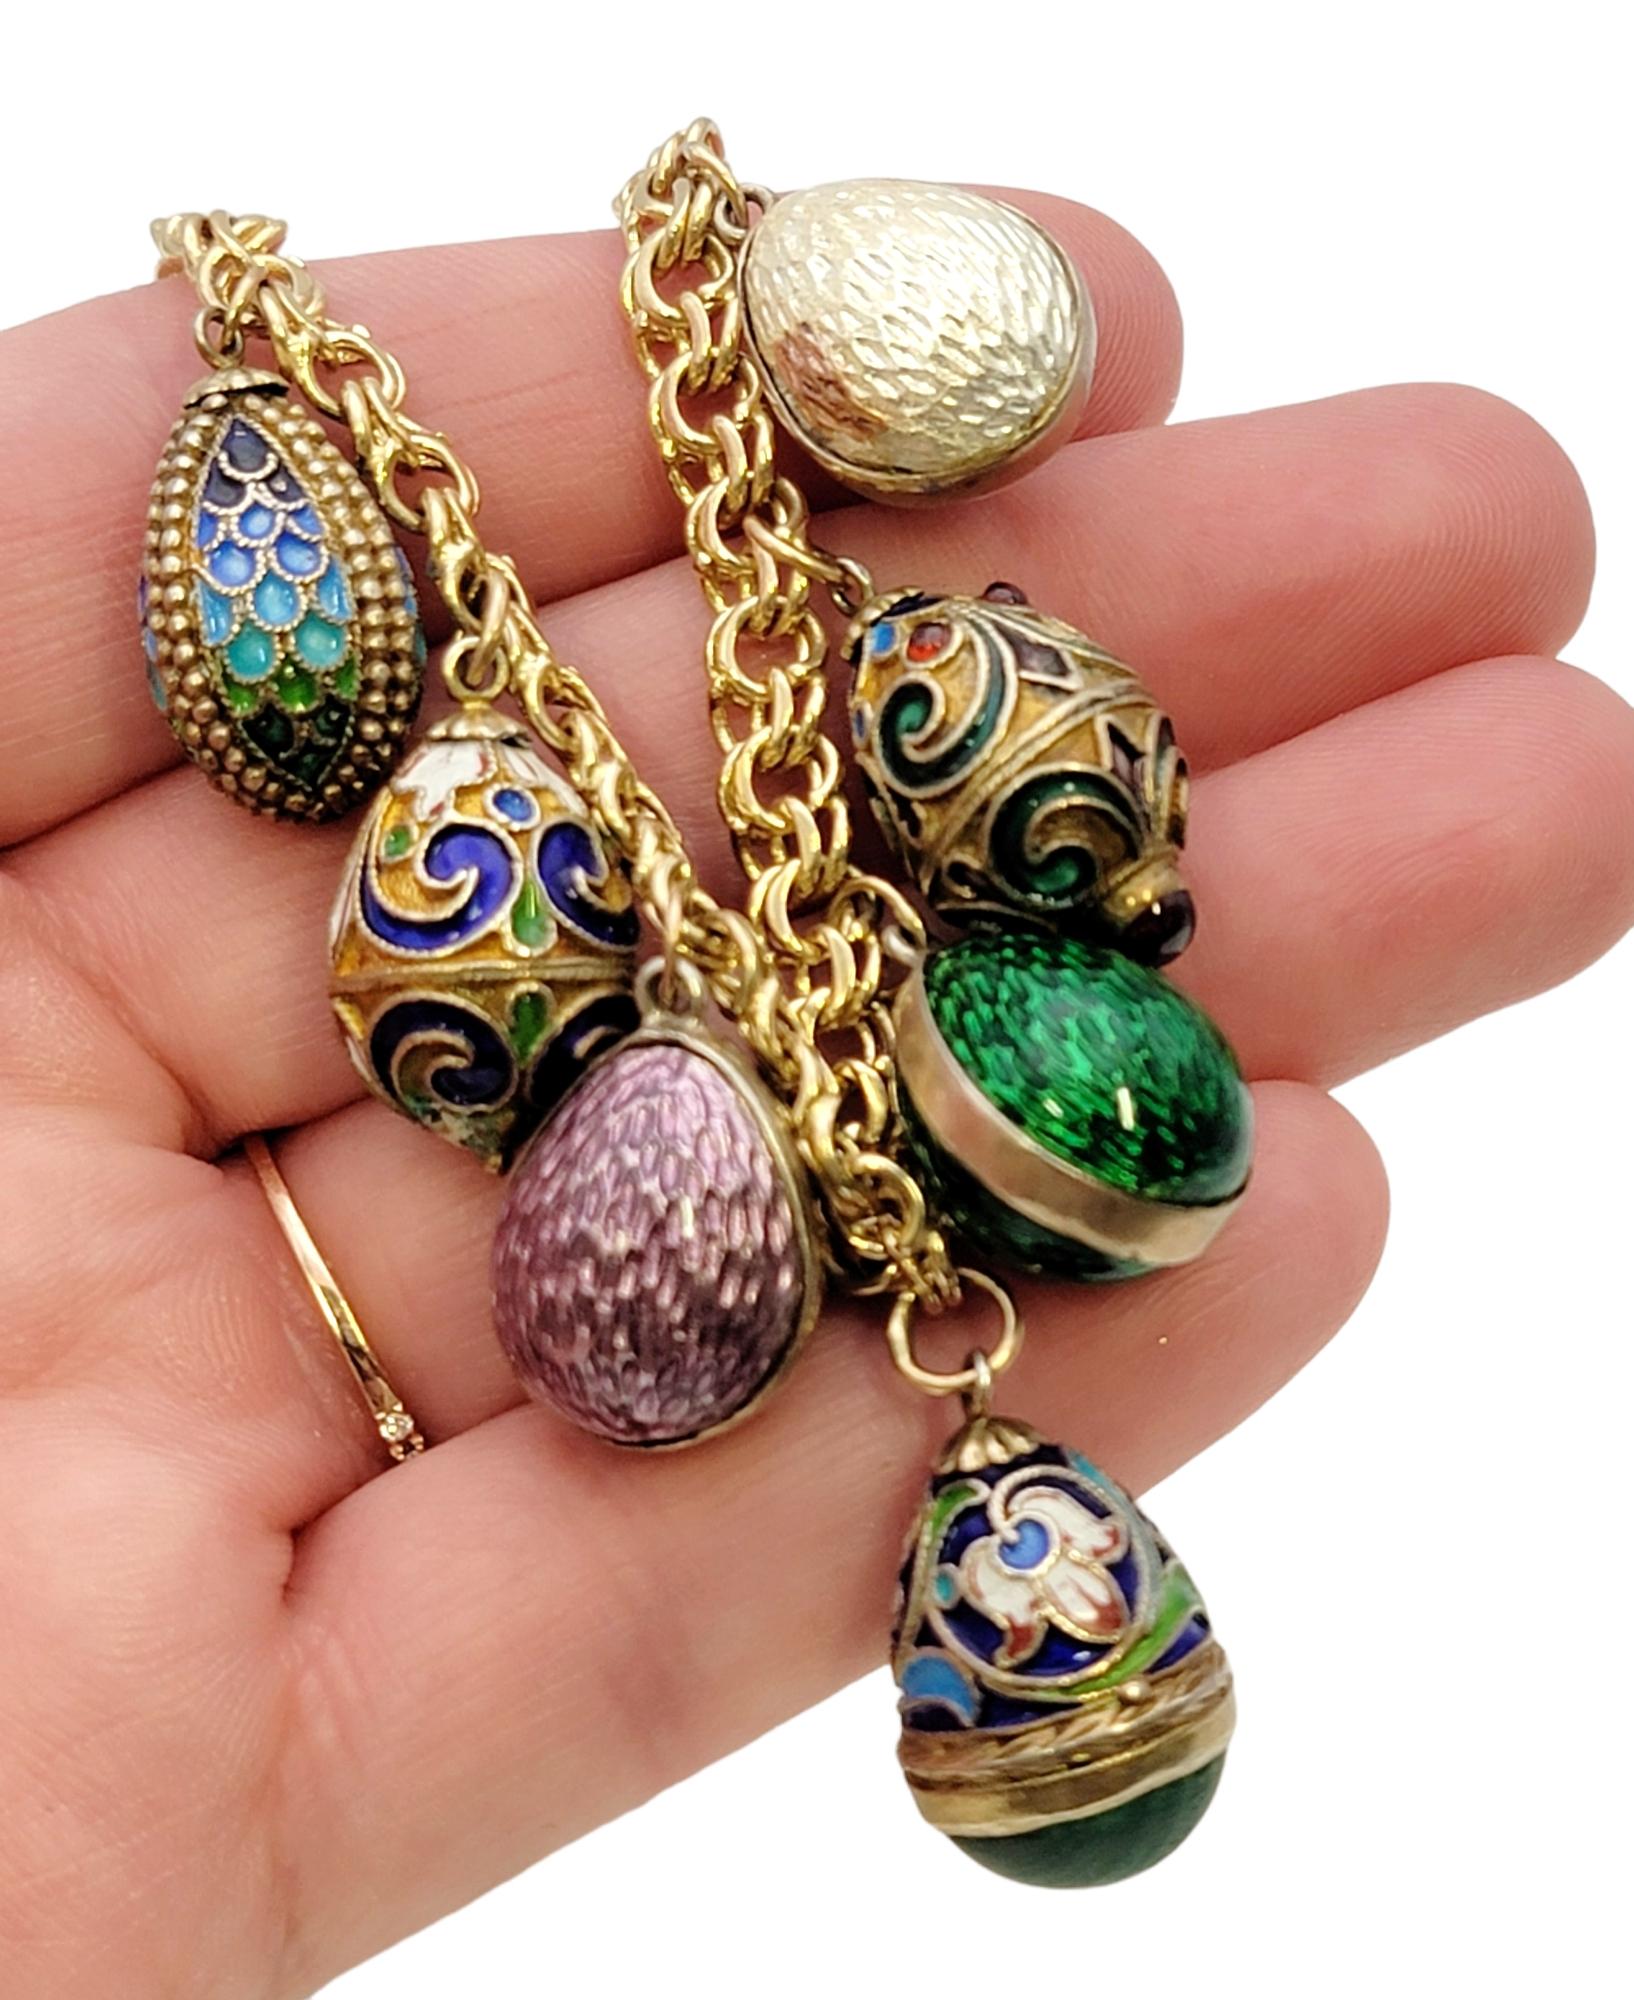 Vintage 14 Karat Yellow Gold Charm Bracelet with 7 Colorful Enamel Egg Charms For Sale 7